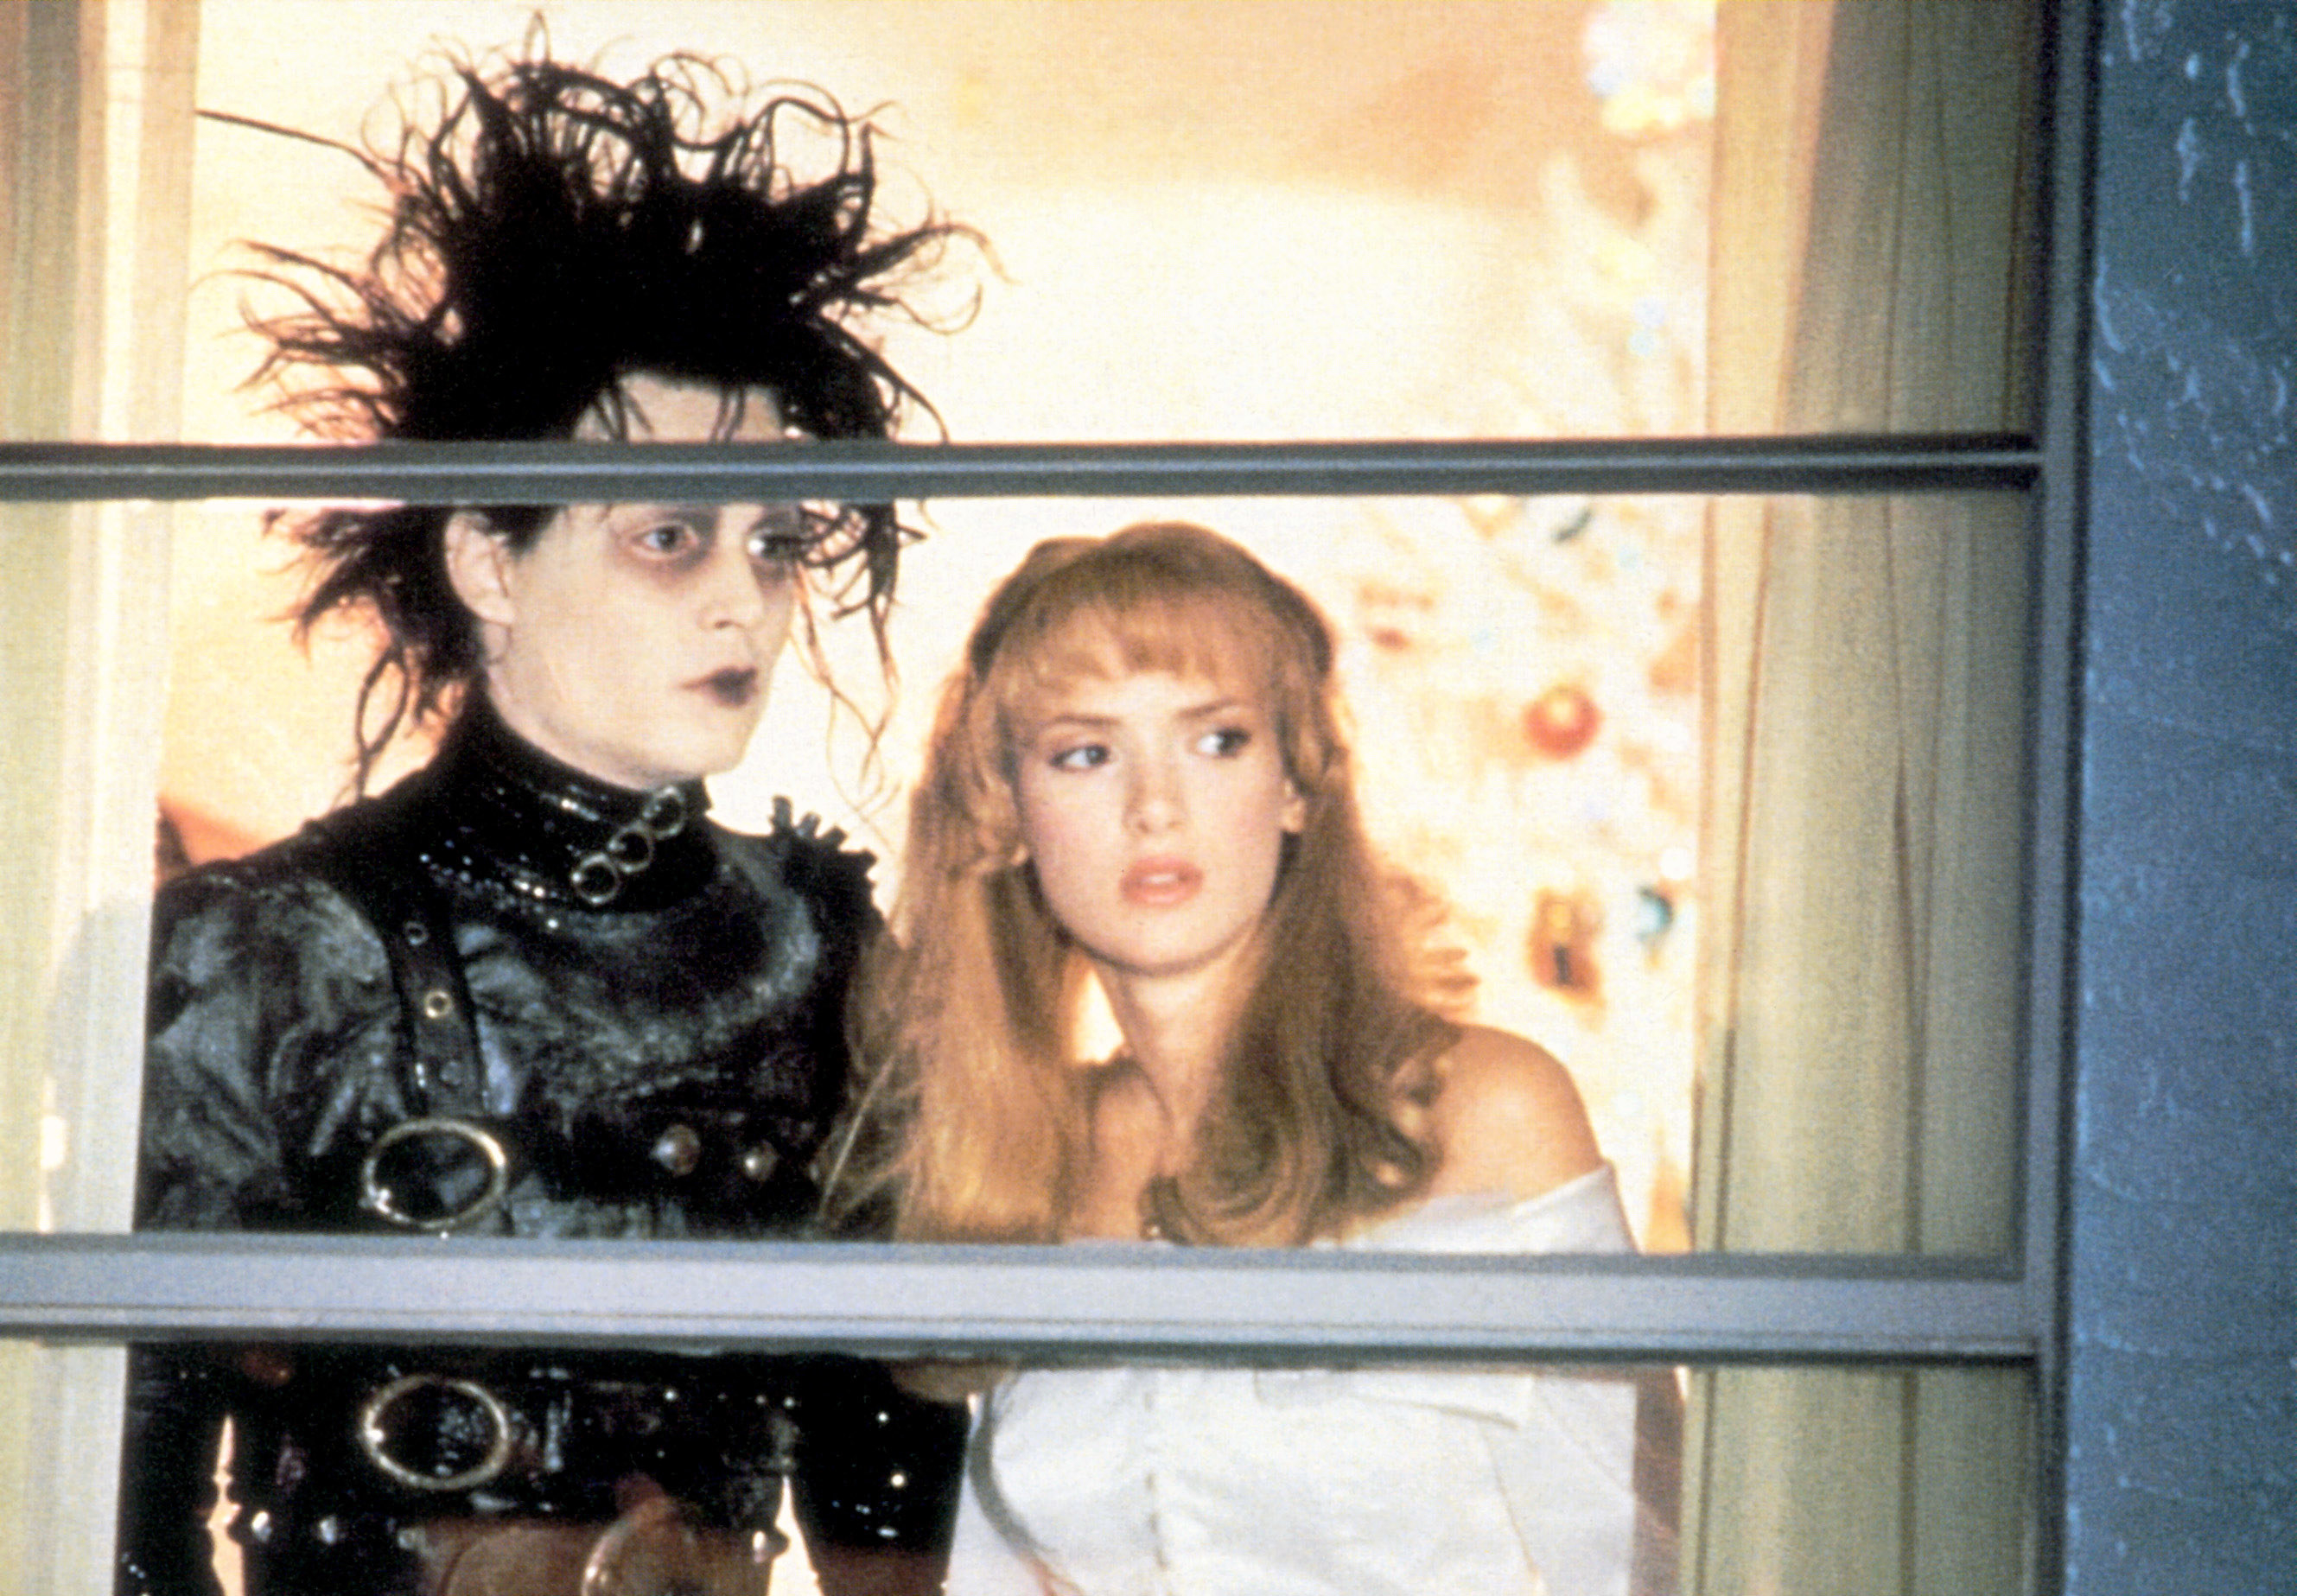 Johnny Depp and Winona Ryder look out a window together